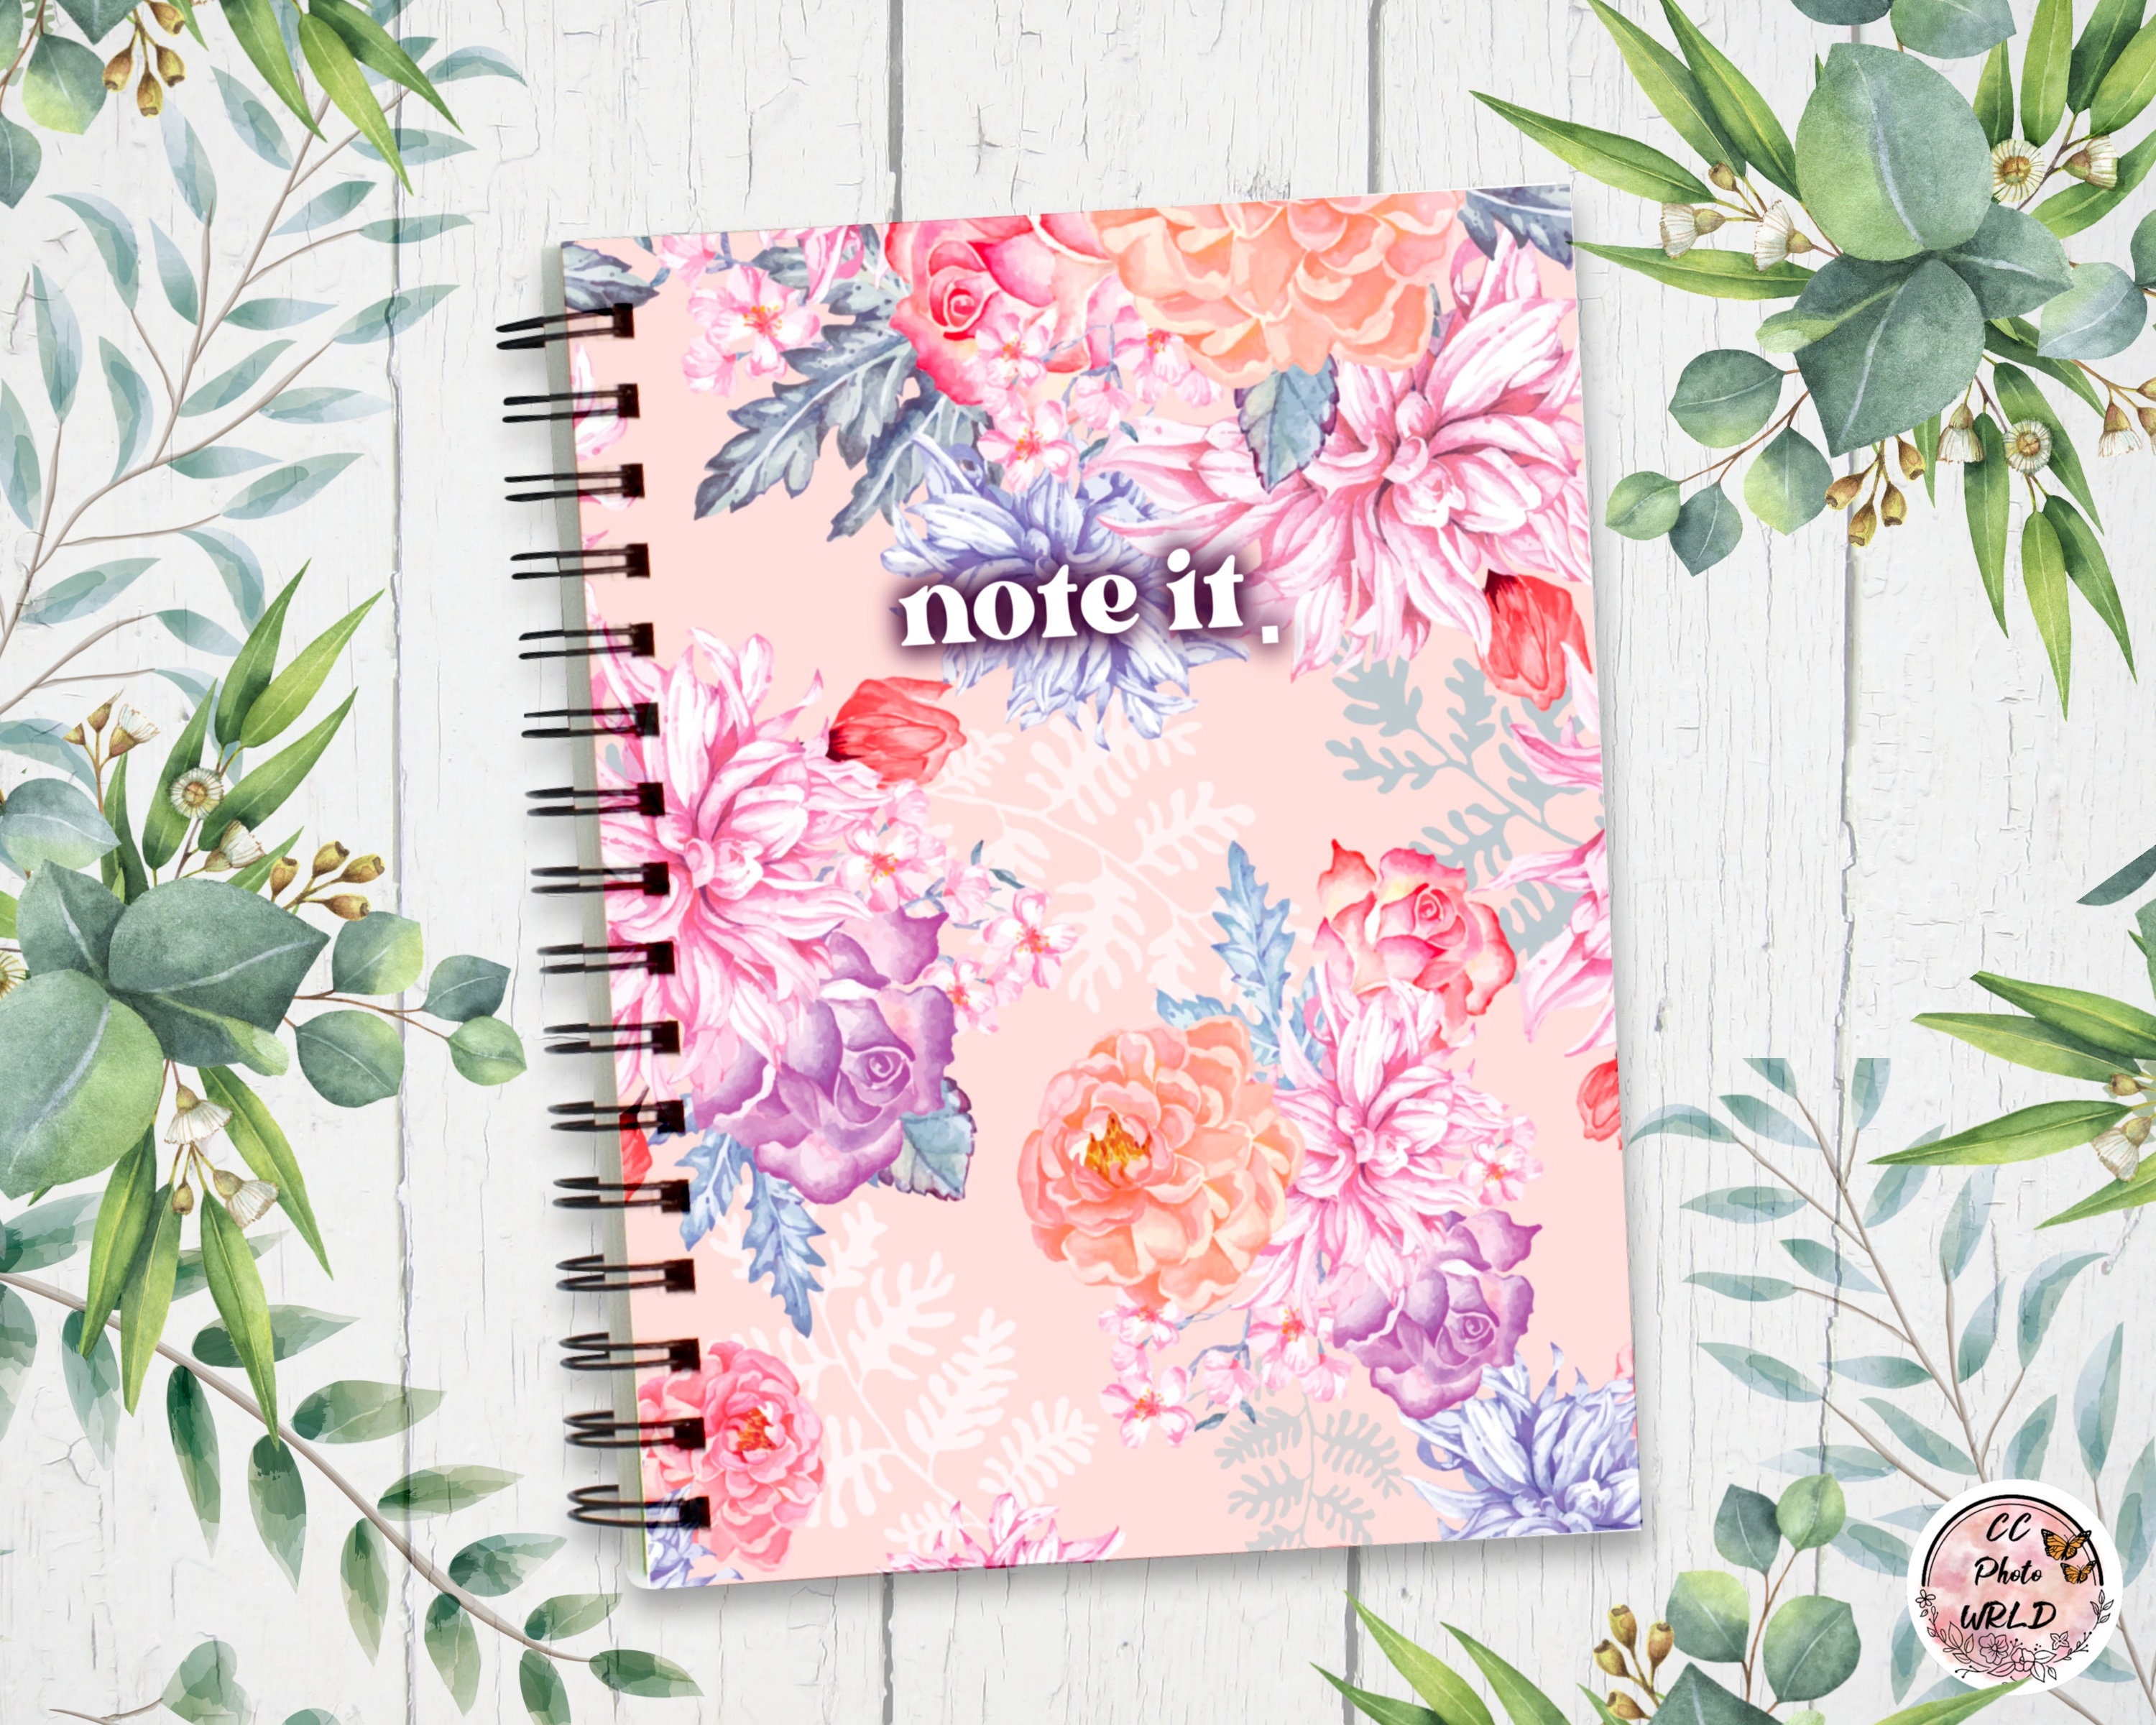 Hardcover Blank Notebook 7colors / Spiral Notebook / Blank